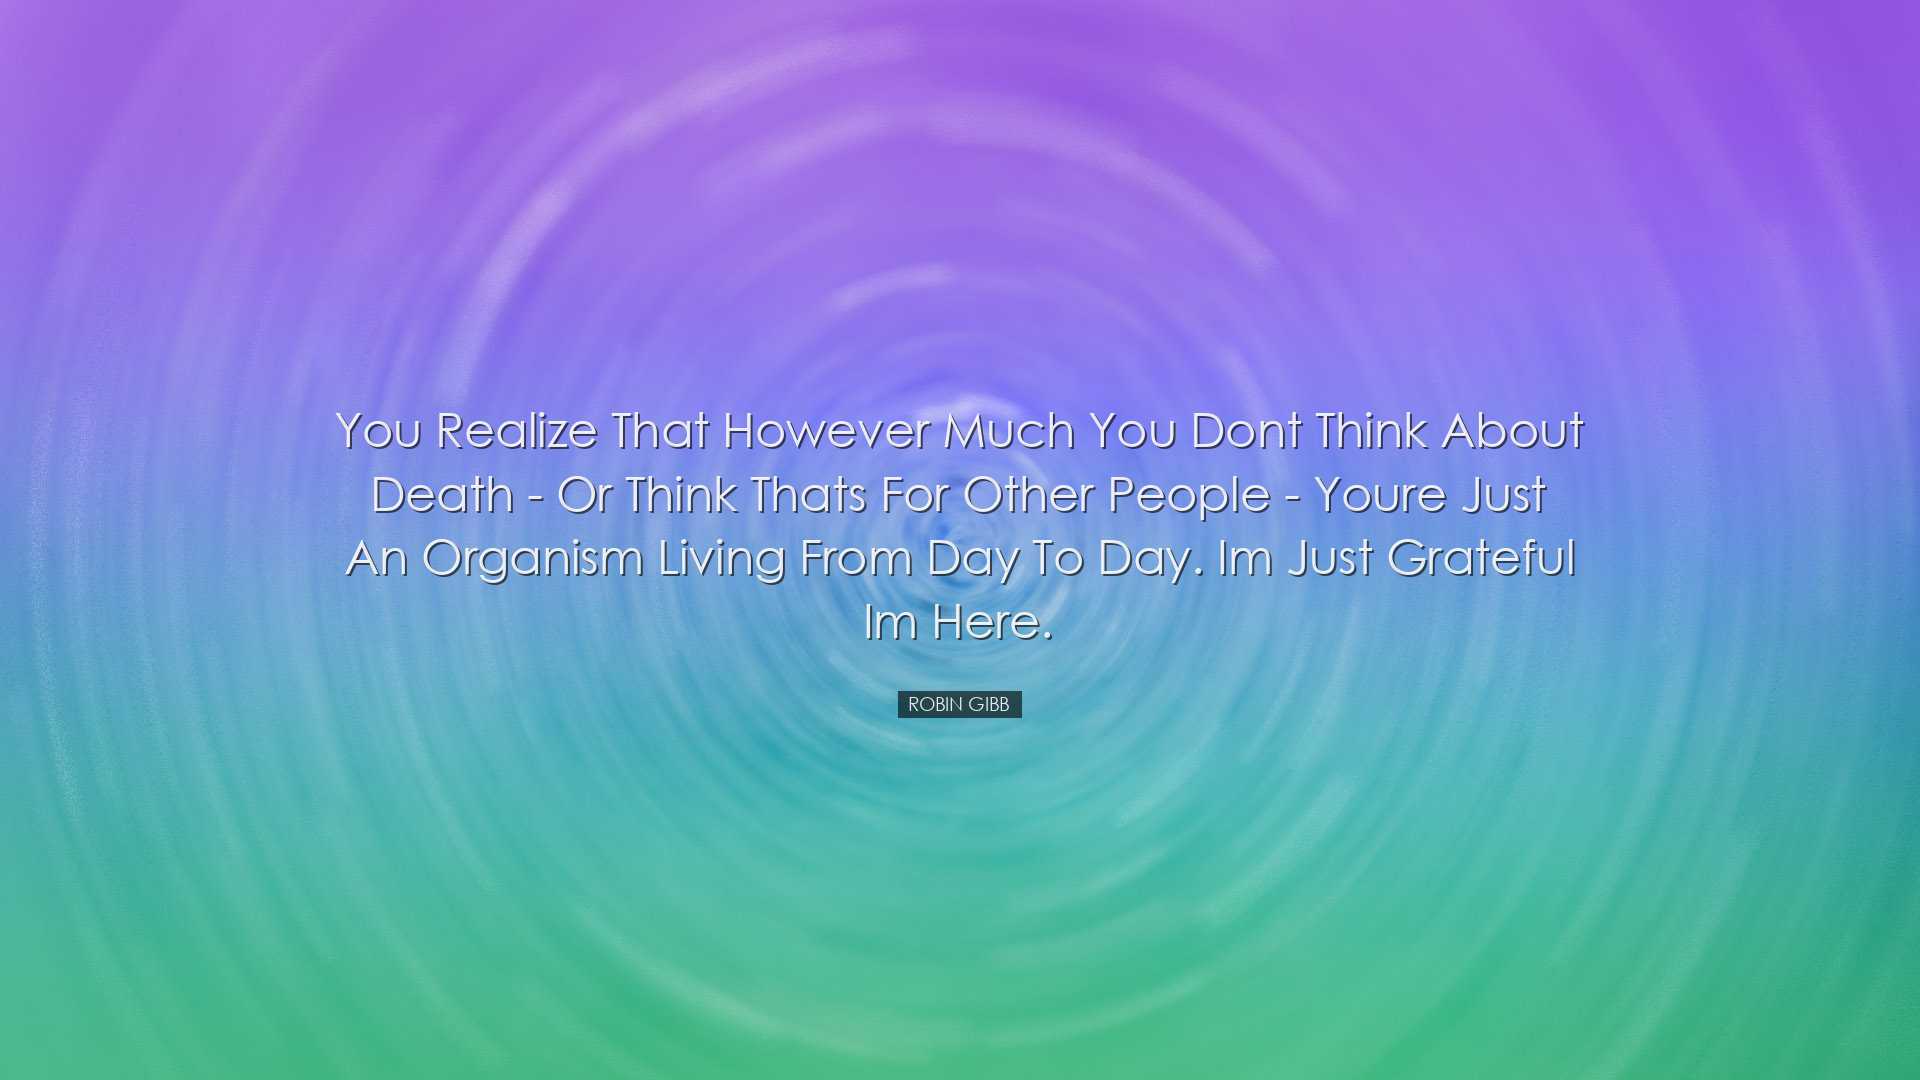 You realize that however much you dont think about death - or thin